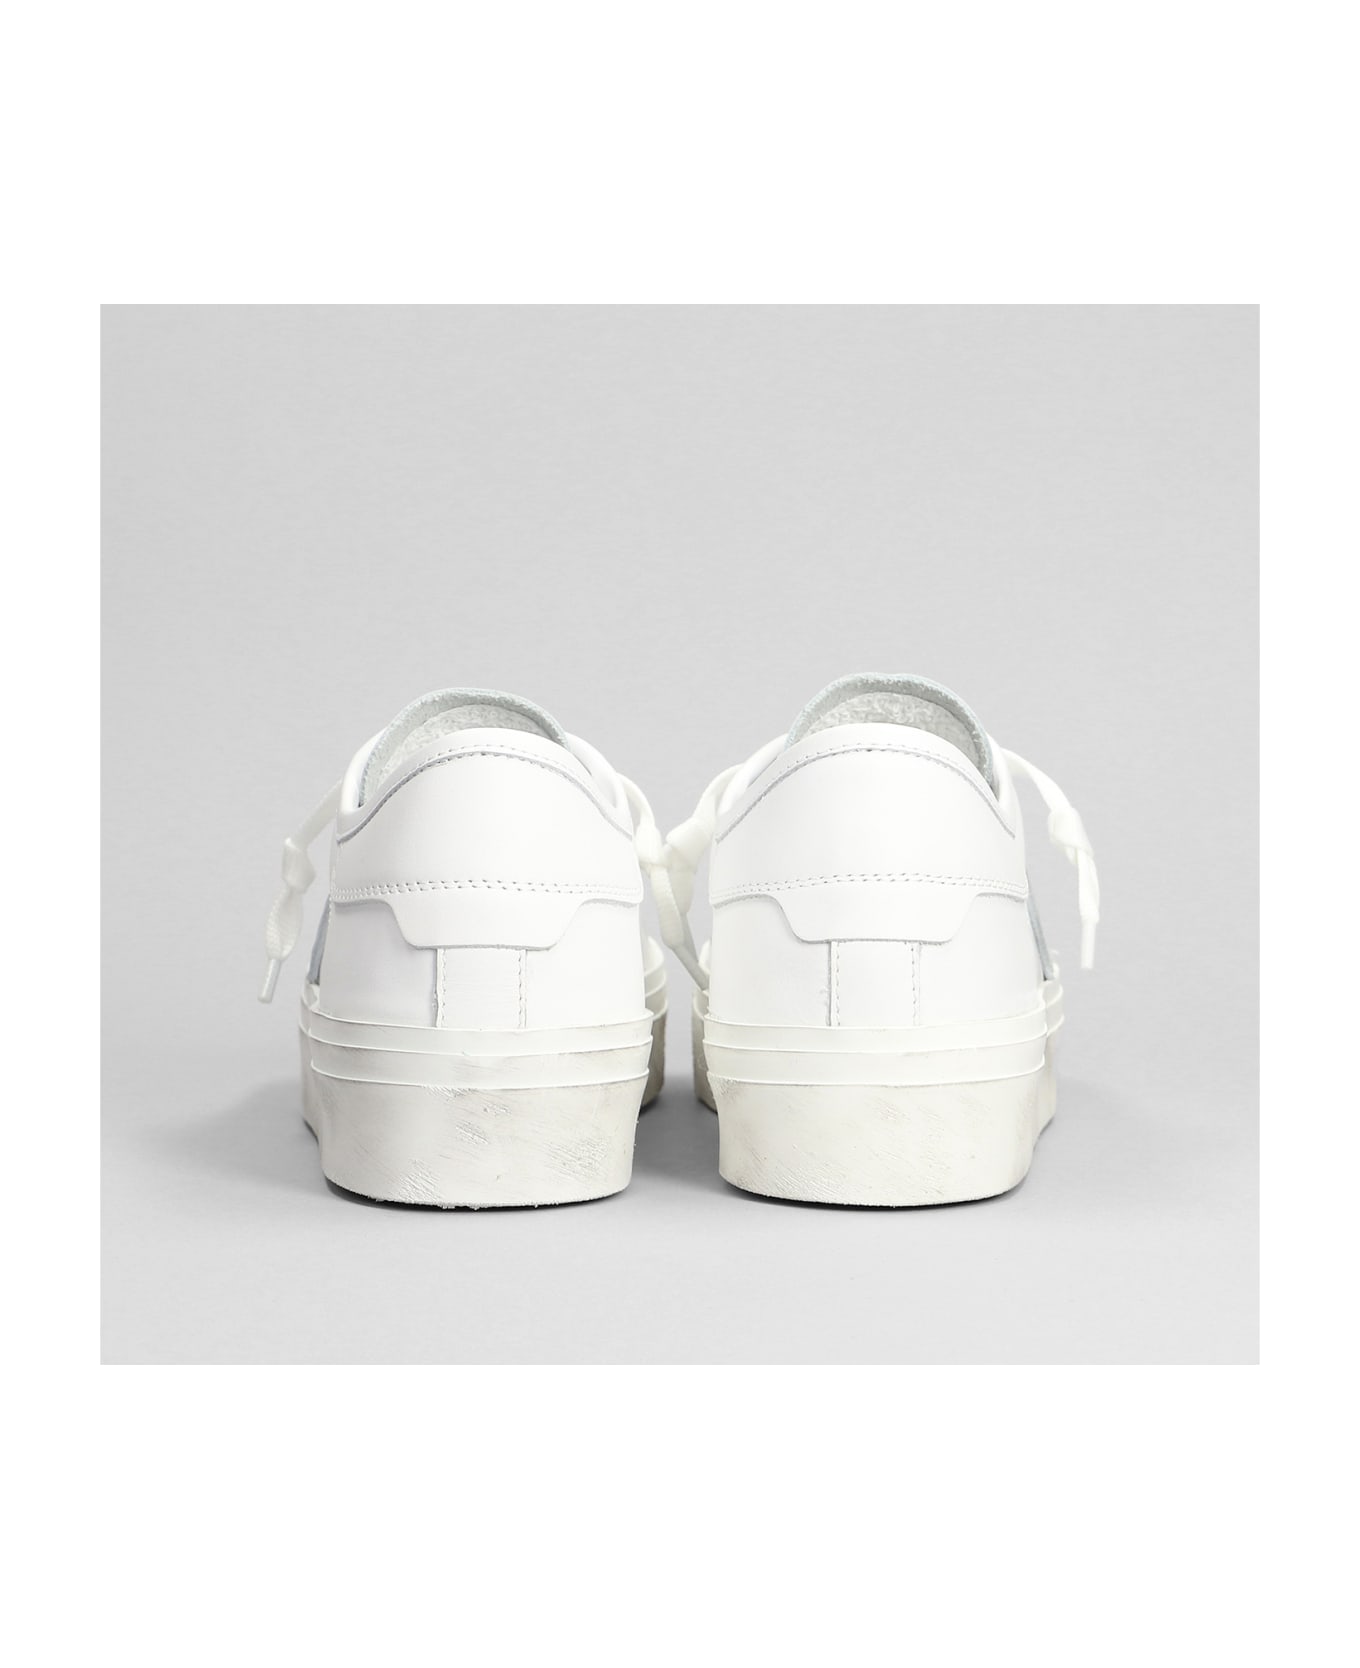 Philippe Model Paris Haute Low Sneakers In White Leather - white スニーカー